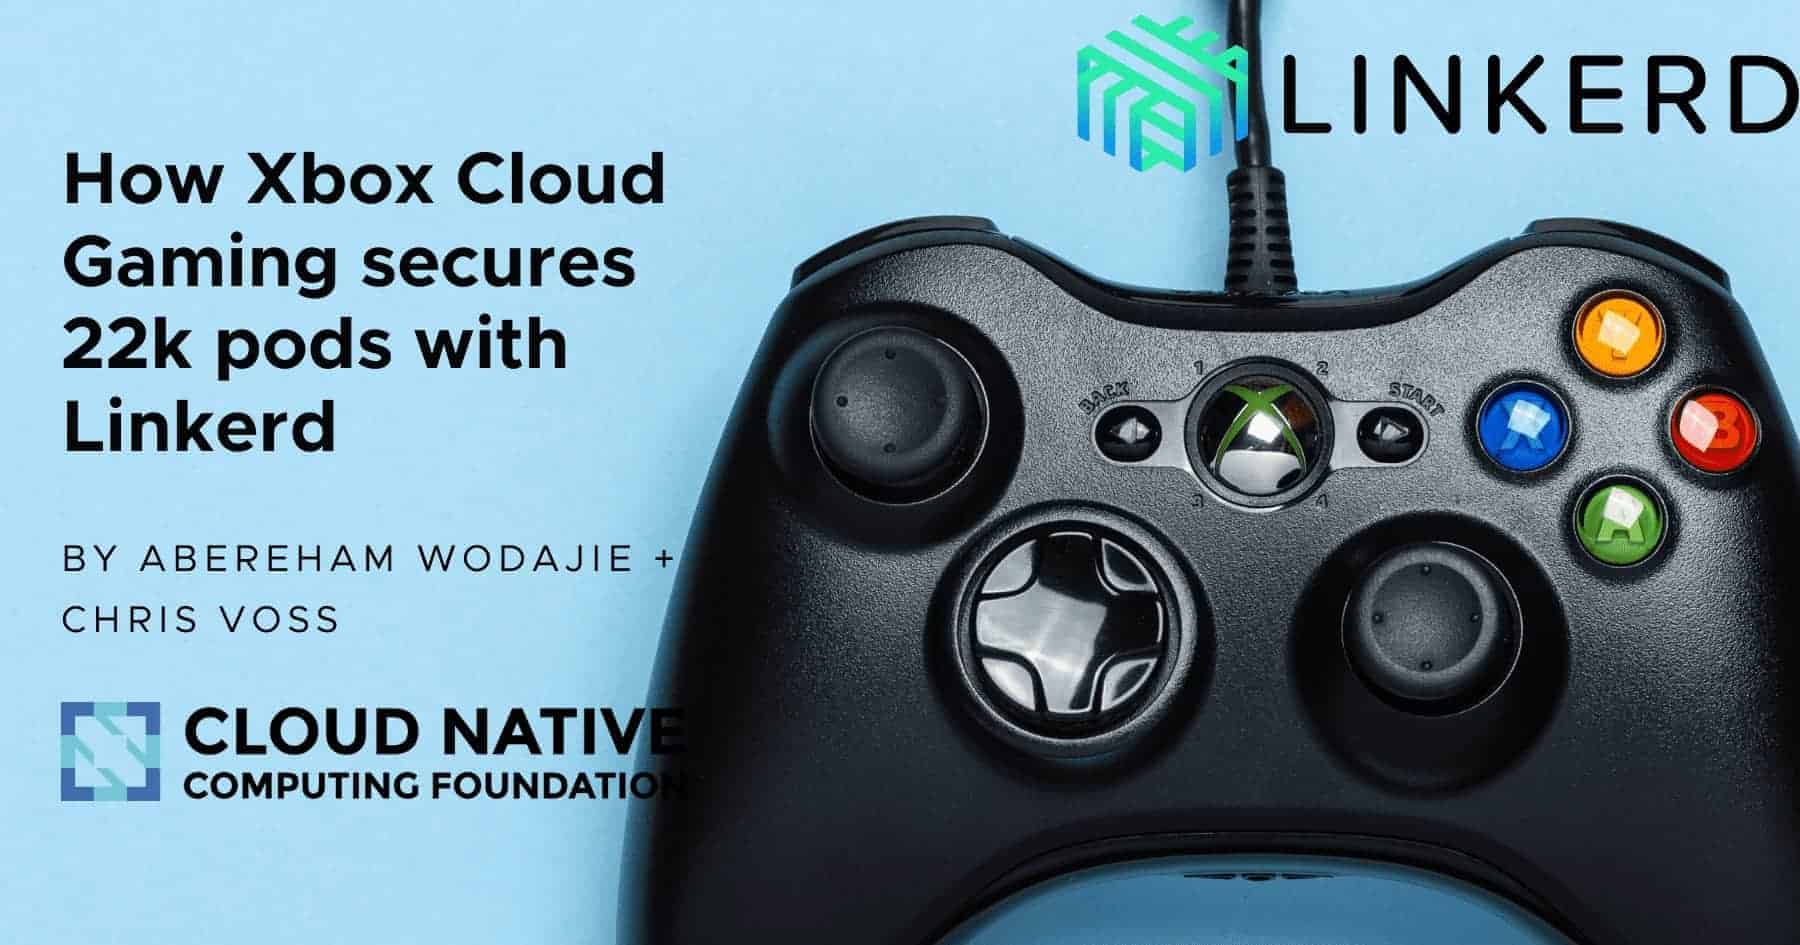 Xbox cloud gaming is a fast and reliable platform to play your